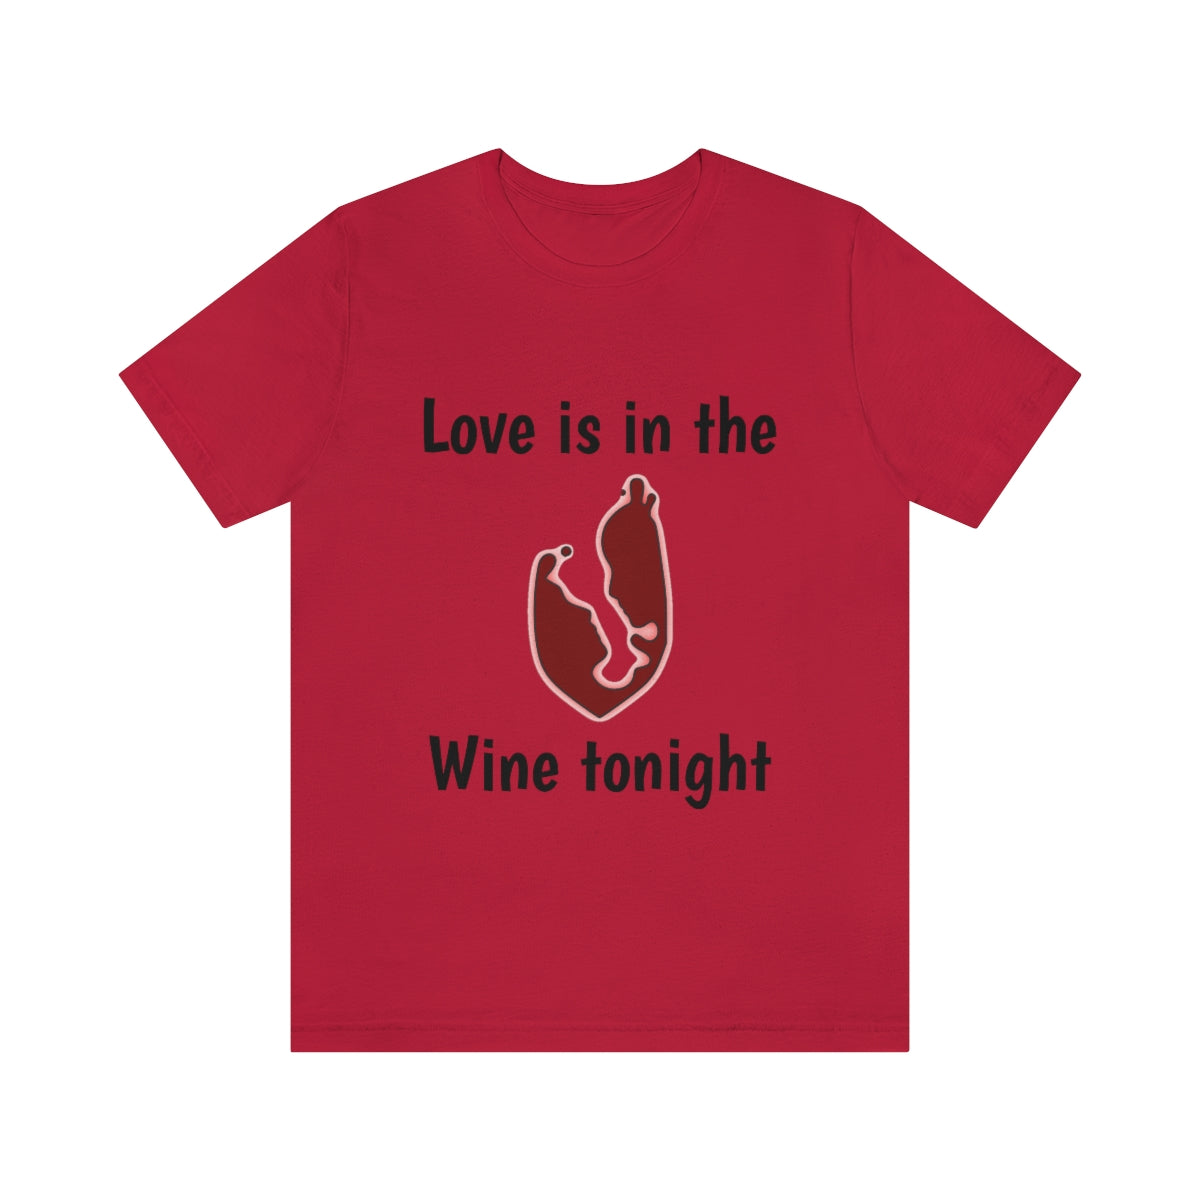 Love is in the wine Tonight - Funny Unisex Short Sleeve Tee - CrazyTomTShirts